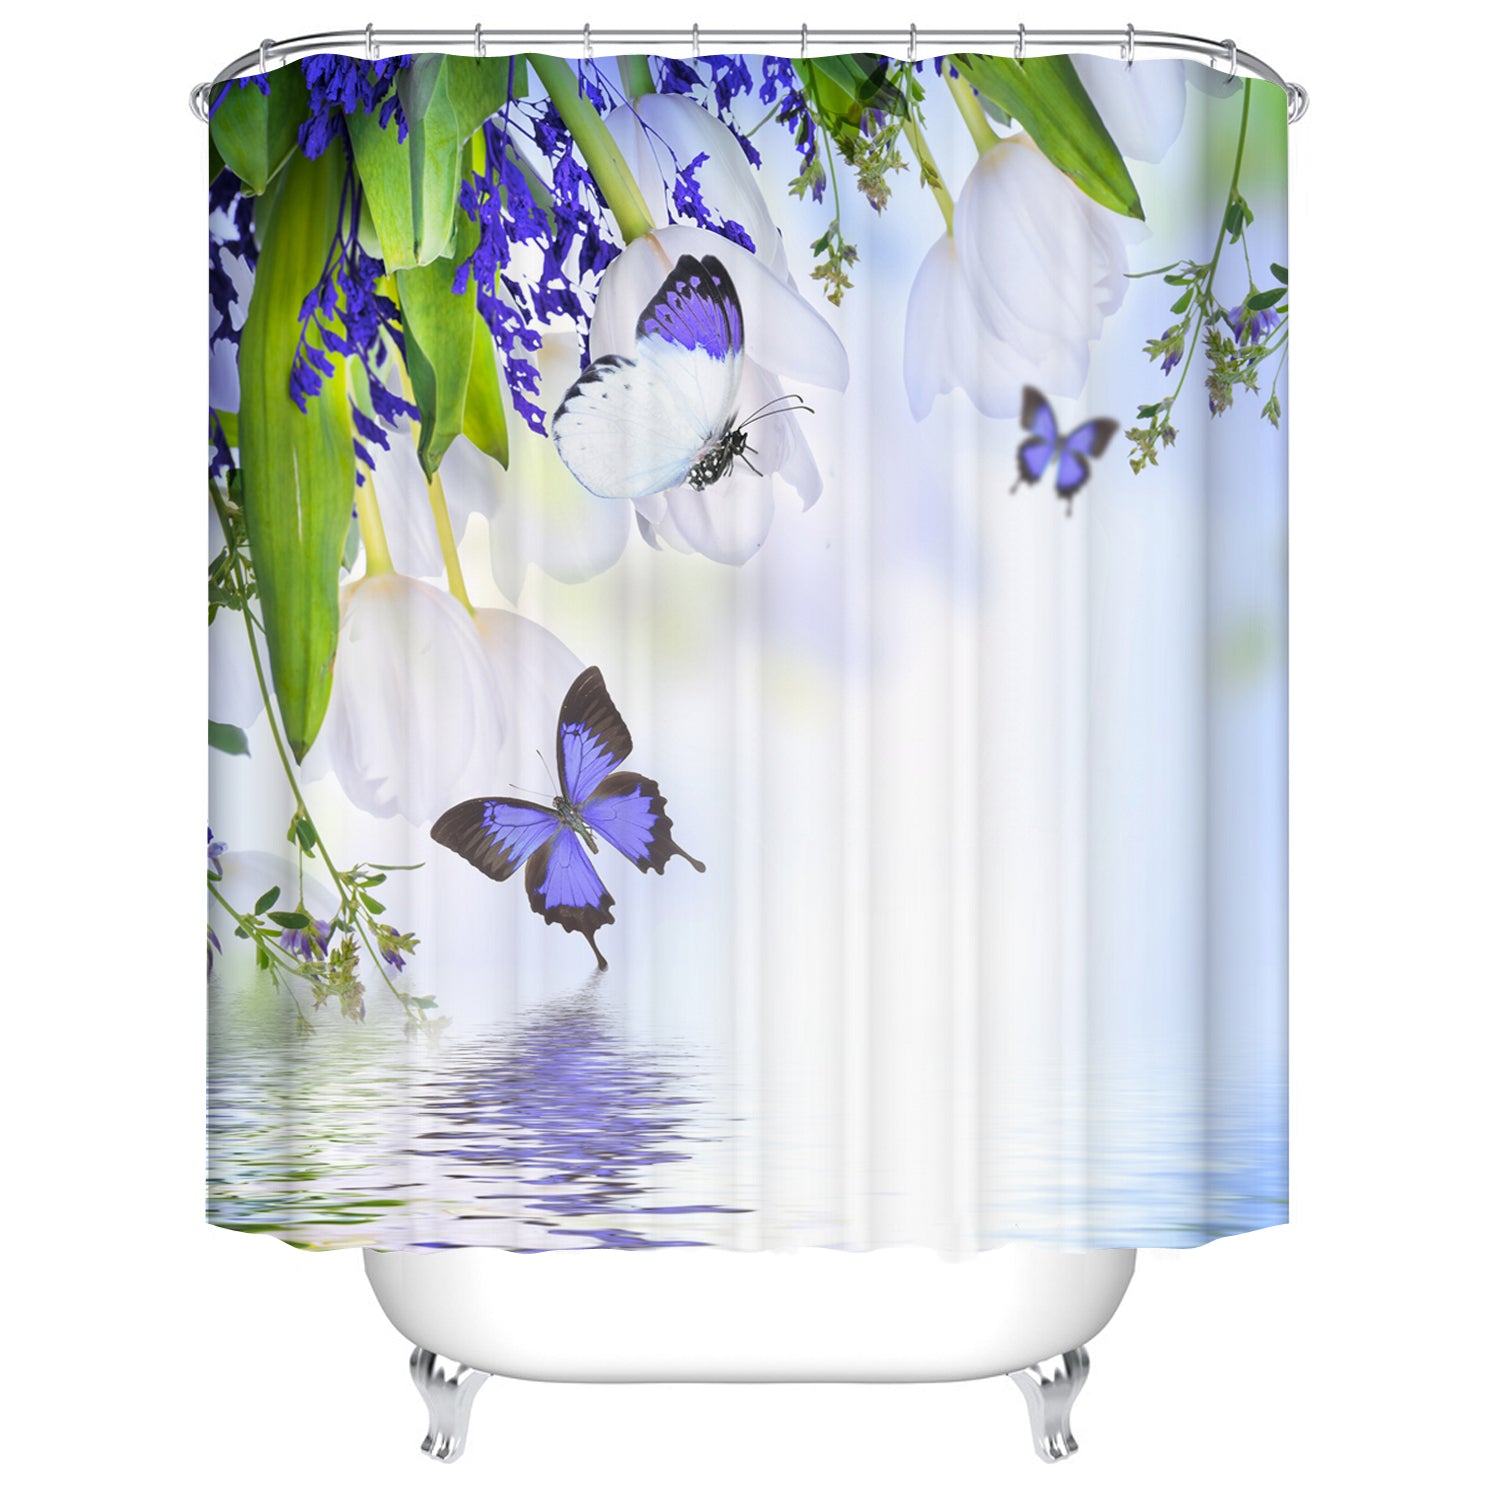 Spring River with White Flowers and Purple Butterfly Shower Curtain